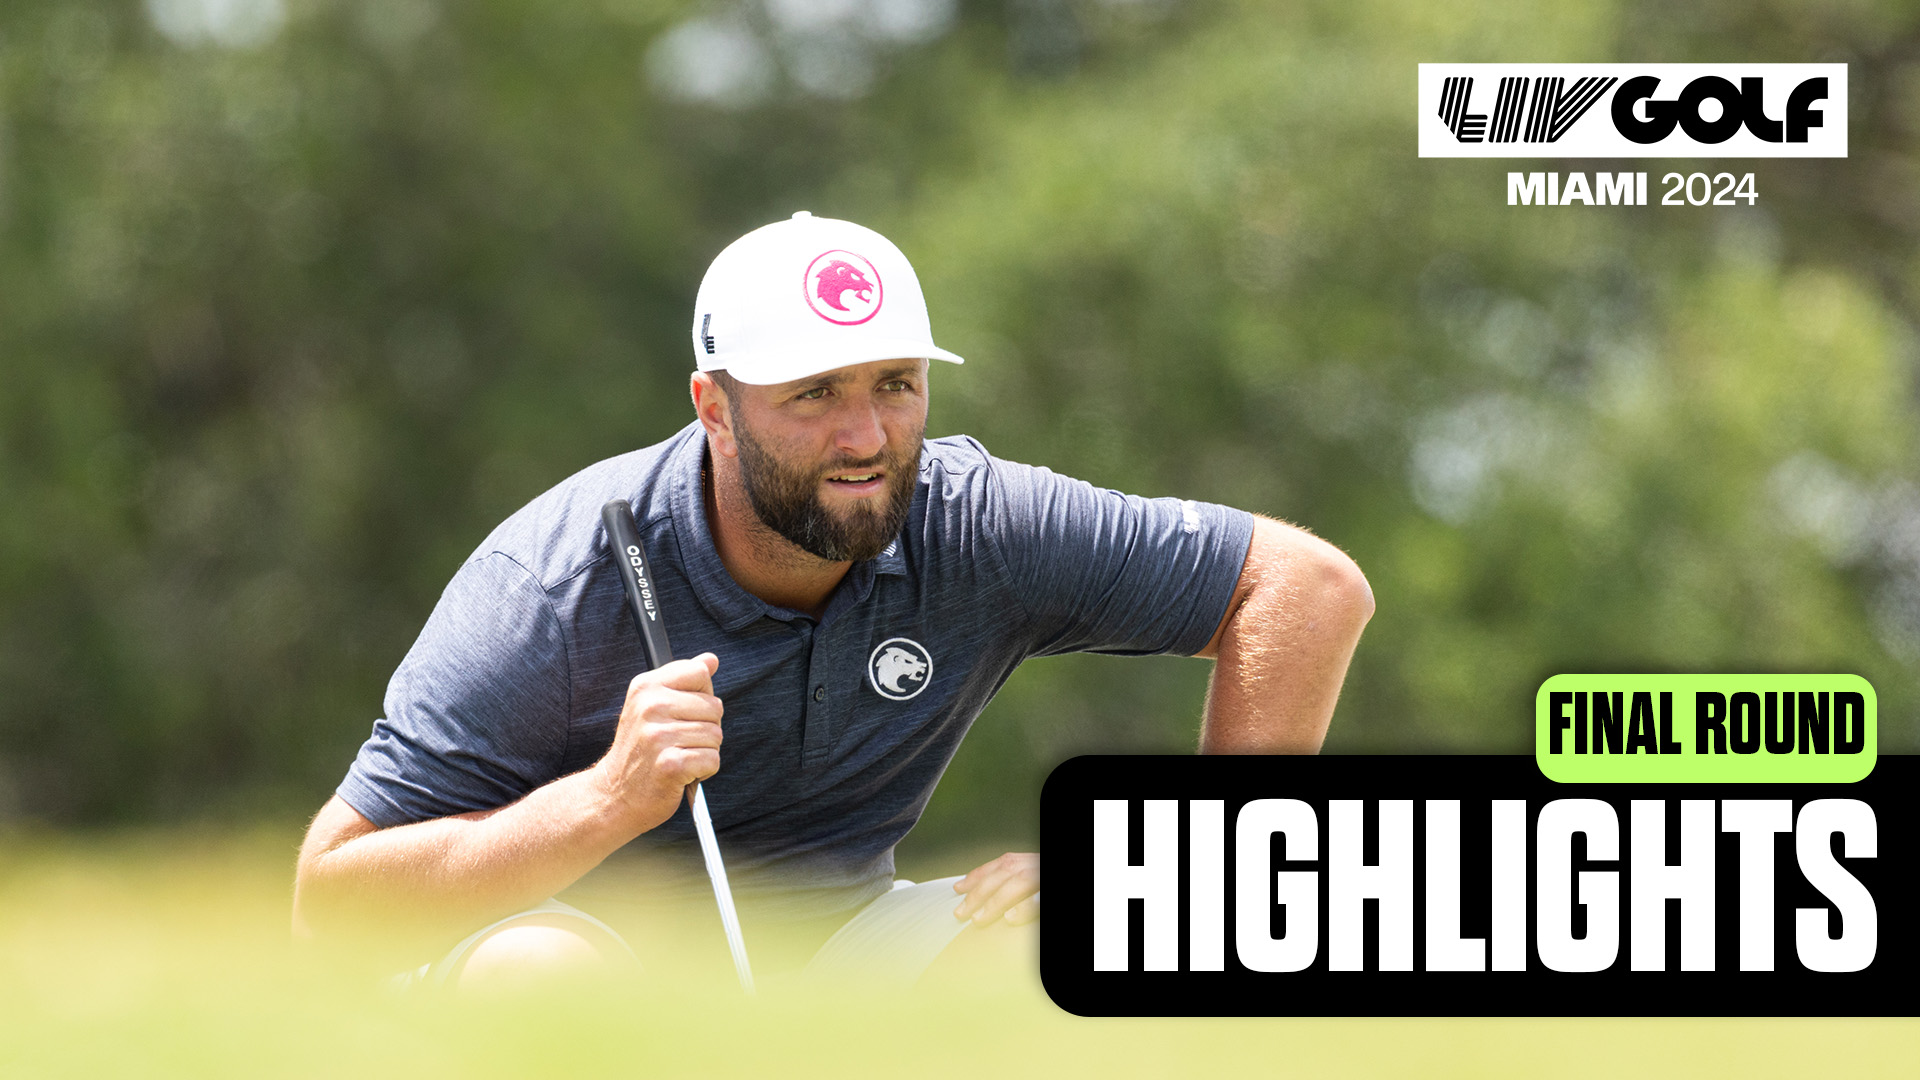 FULL HIGHLIGHTS: FIGHT TO THE FINISH AT DORAL | LIV GOLF MIAMI